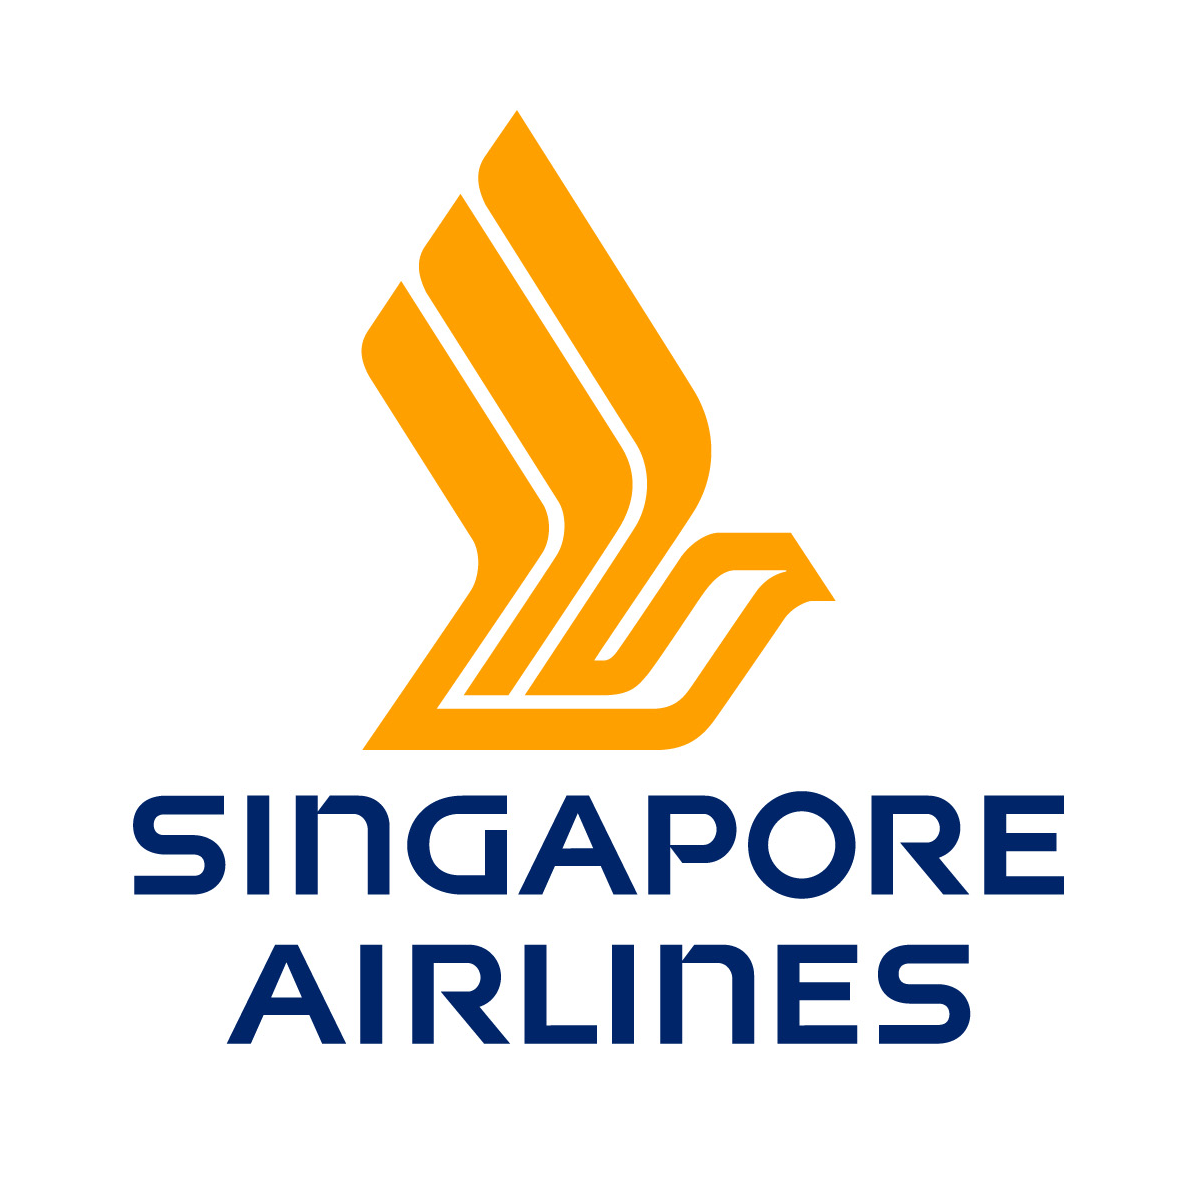 File:Singapore Airlines Logo.